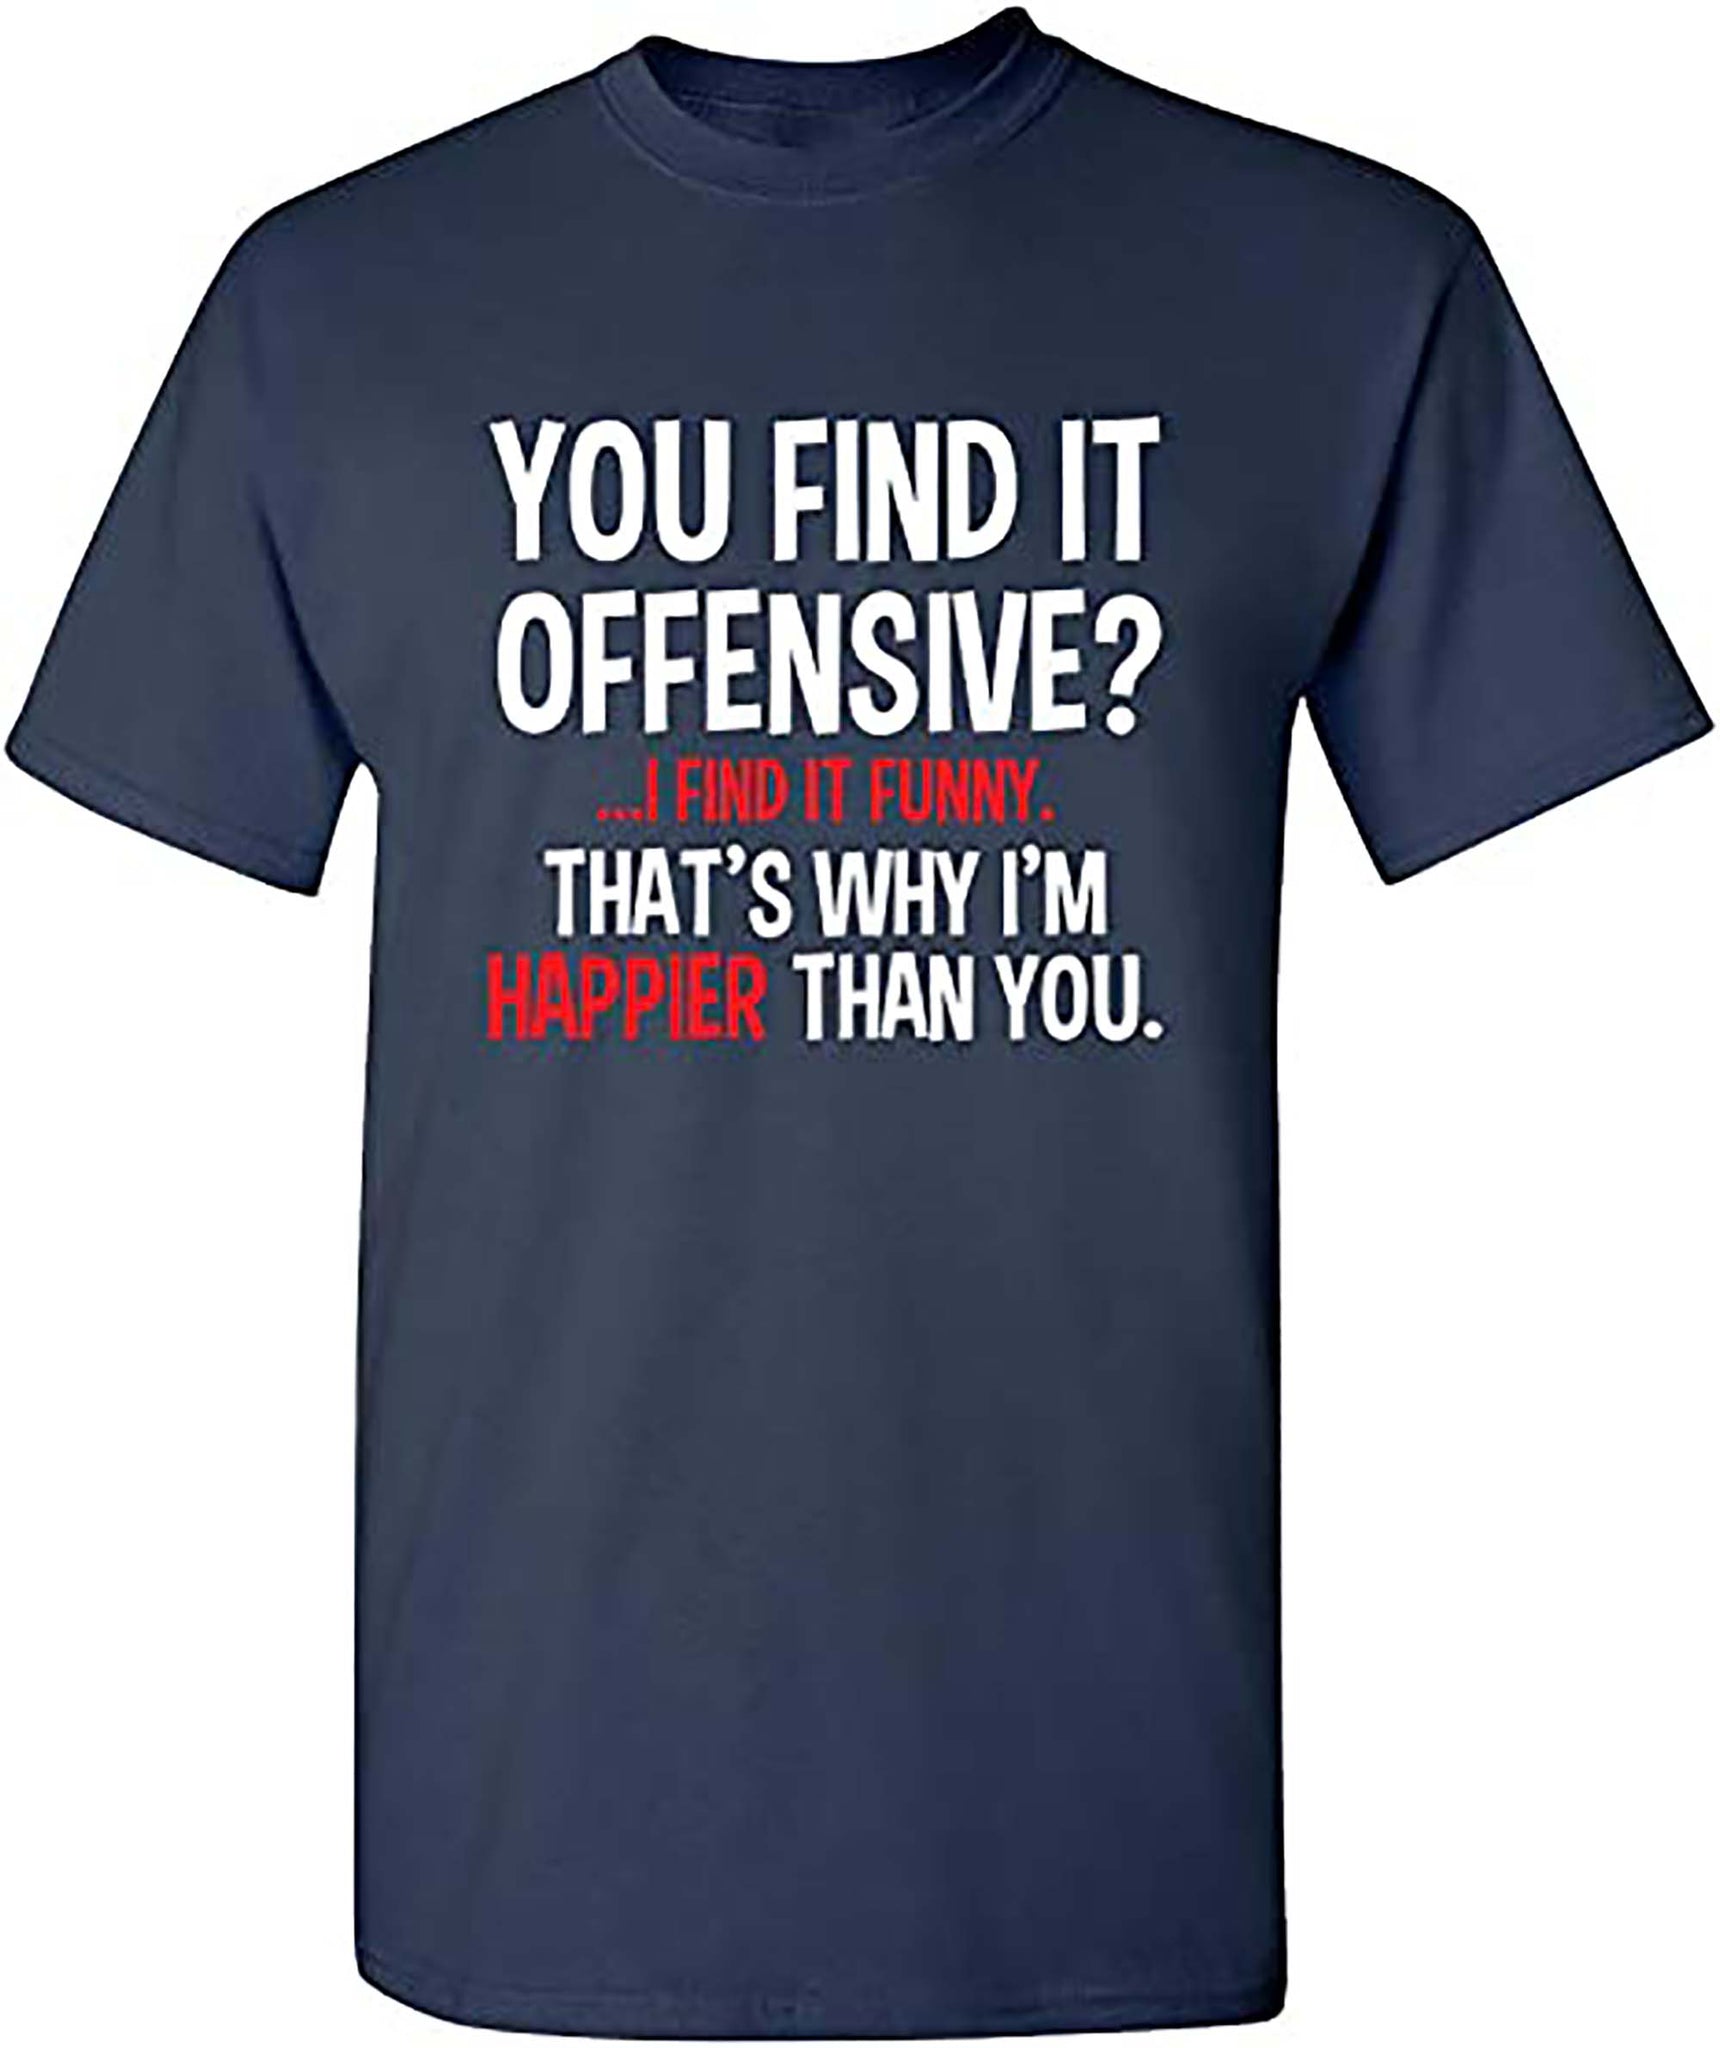 You Find It Offensive I Find It Funny Humorous Graphic Mens Funny T-Shirt-Navy